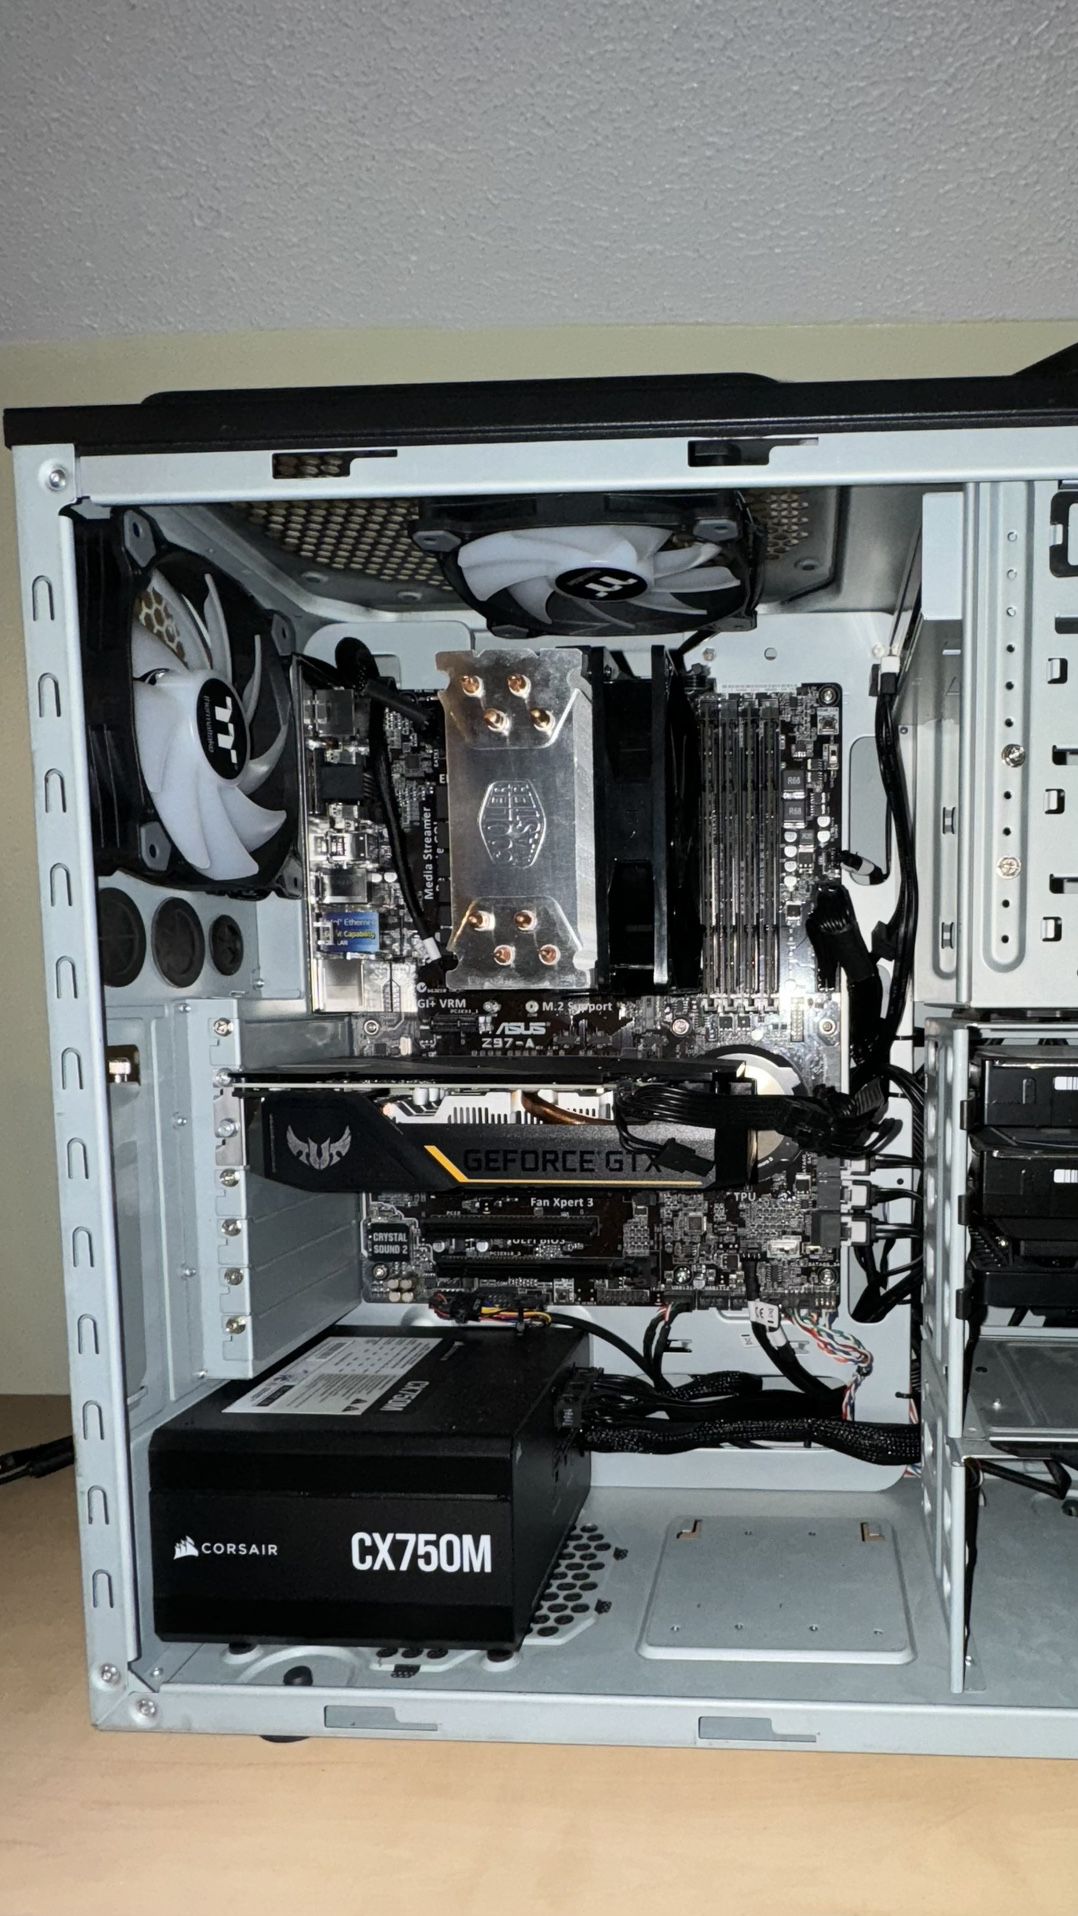 4th Gen i7 intel Haswell 4790K 16GB Ram along with Motherboard Parts